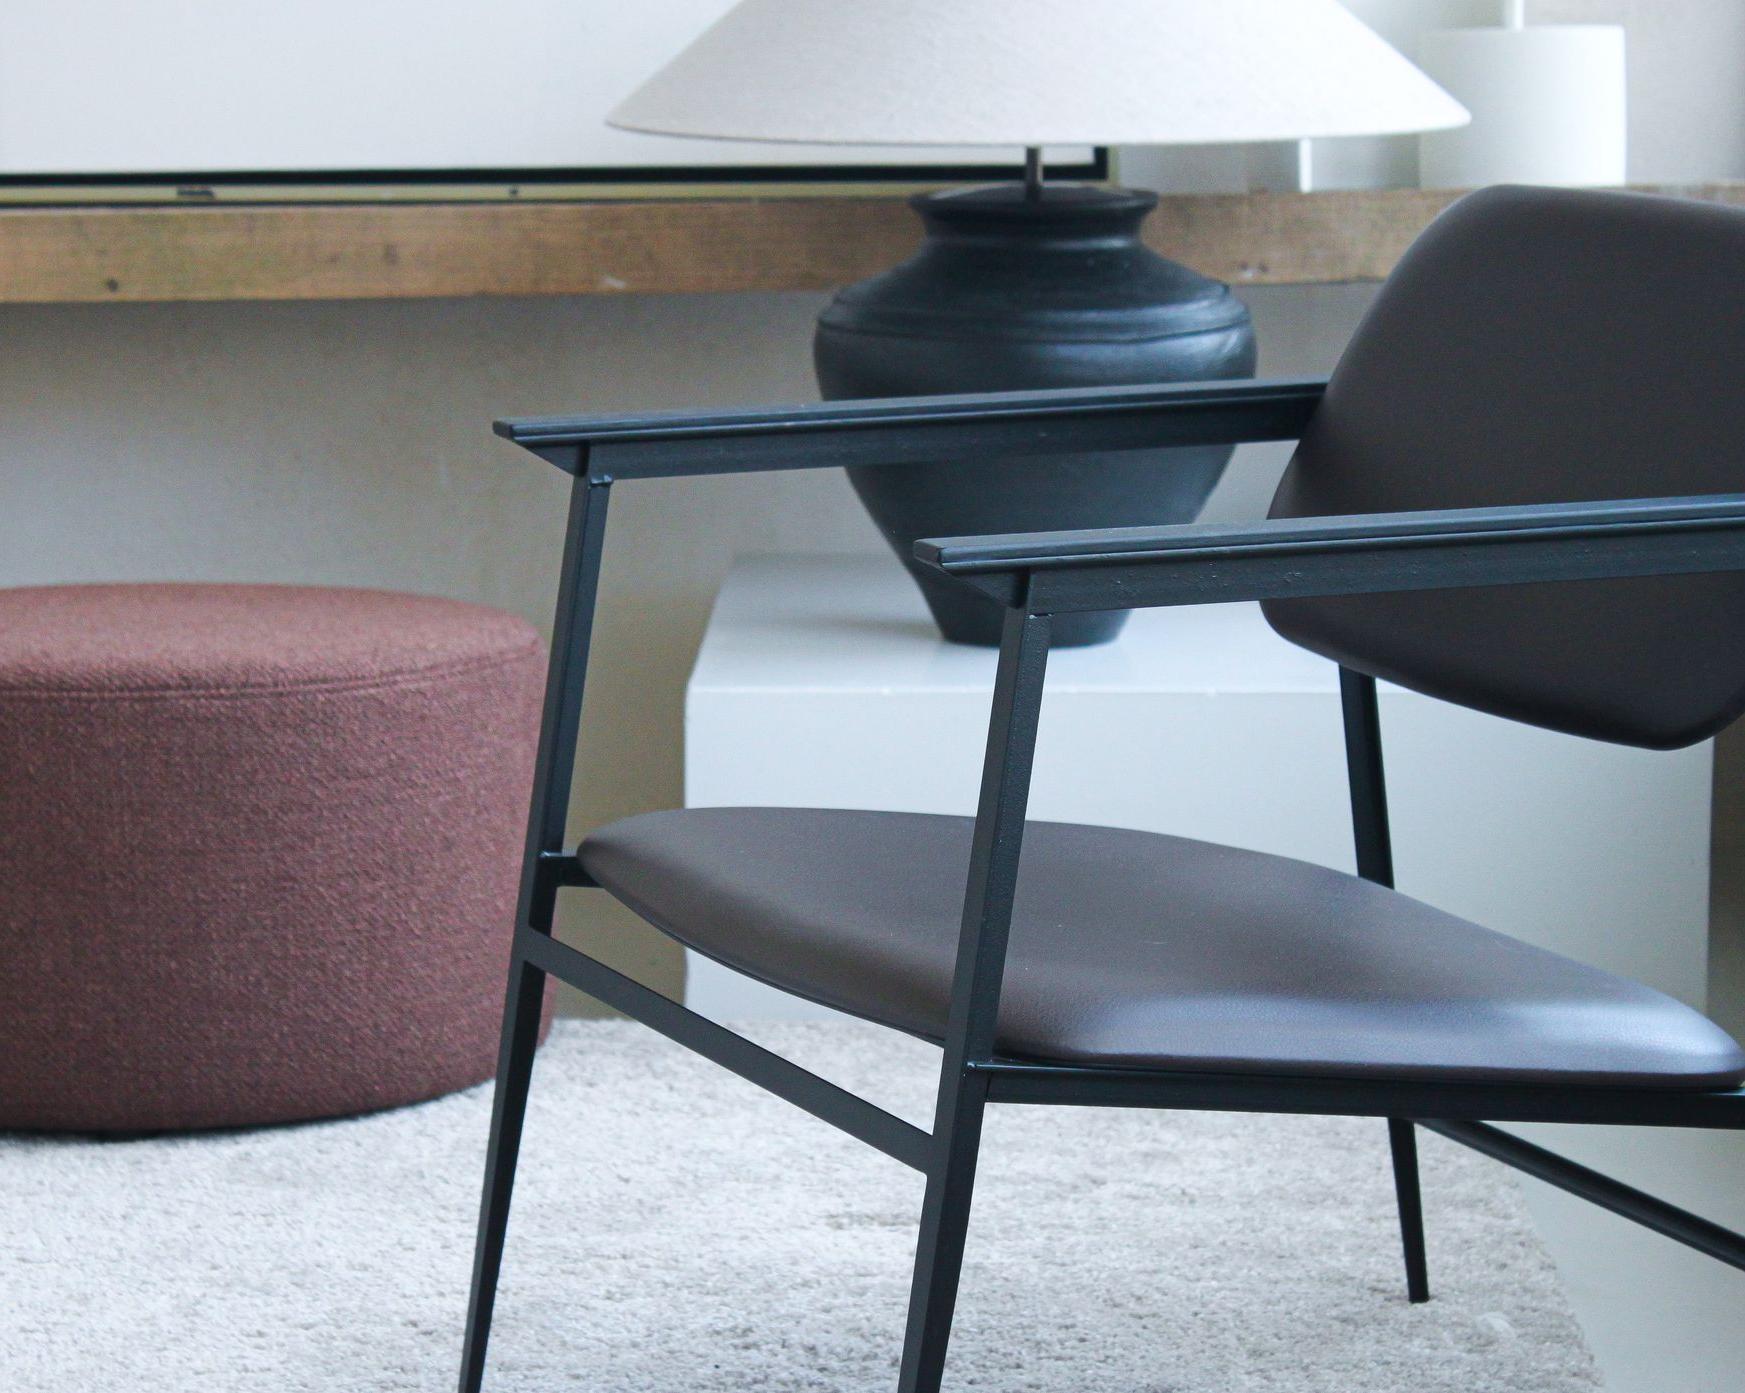 Live Light | Sofie Noyen's home featuring the Barrow pouf and DC lounge chair